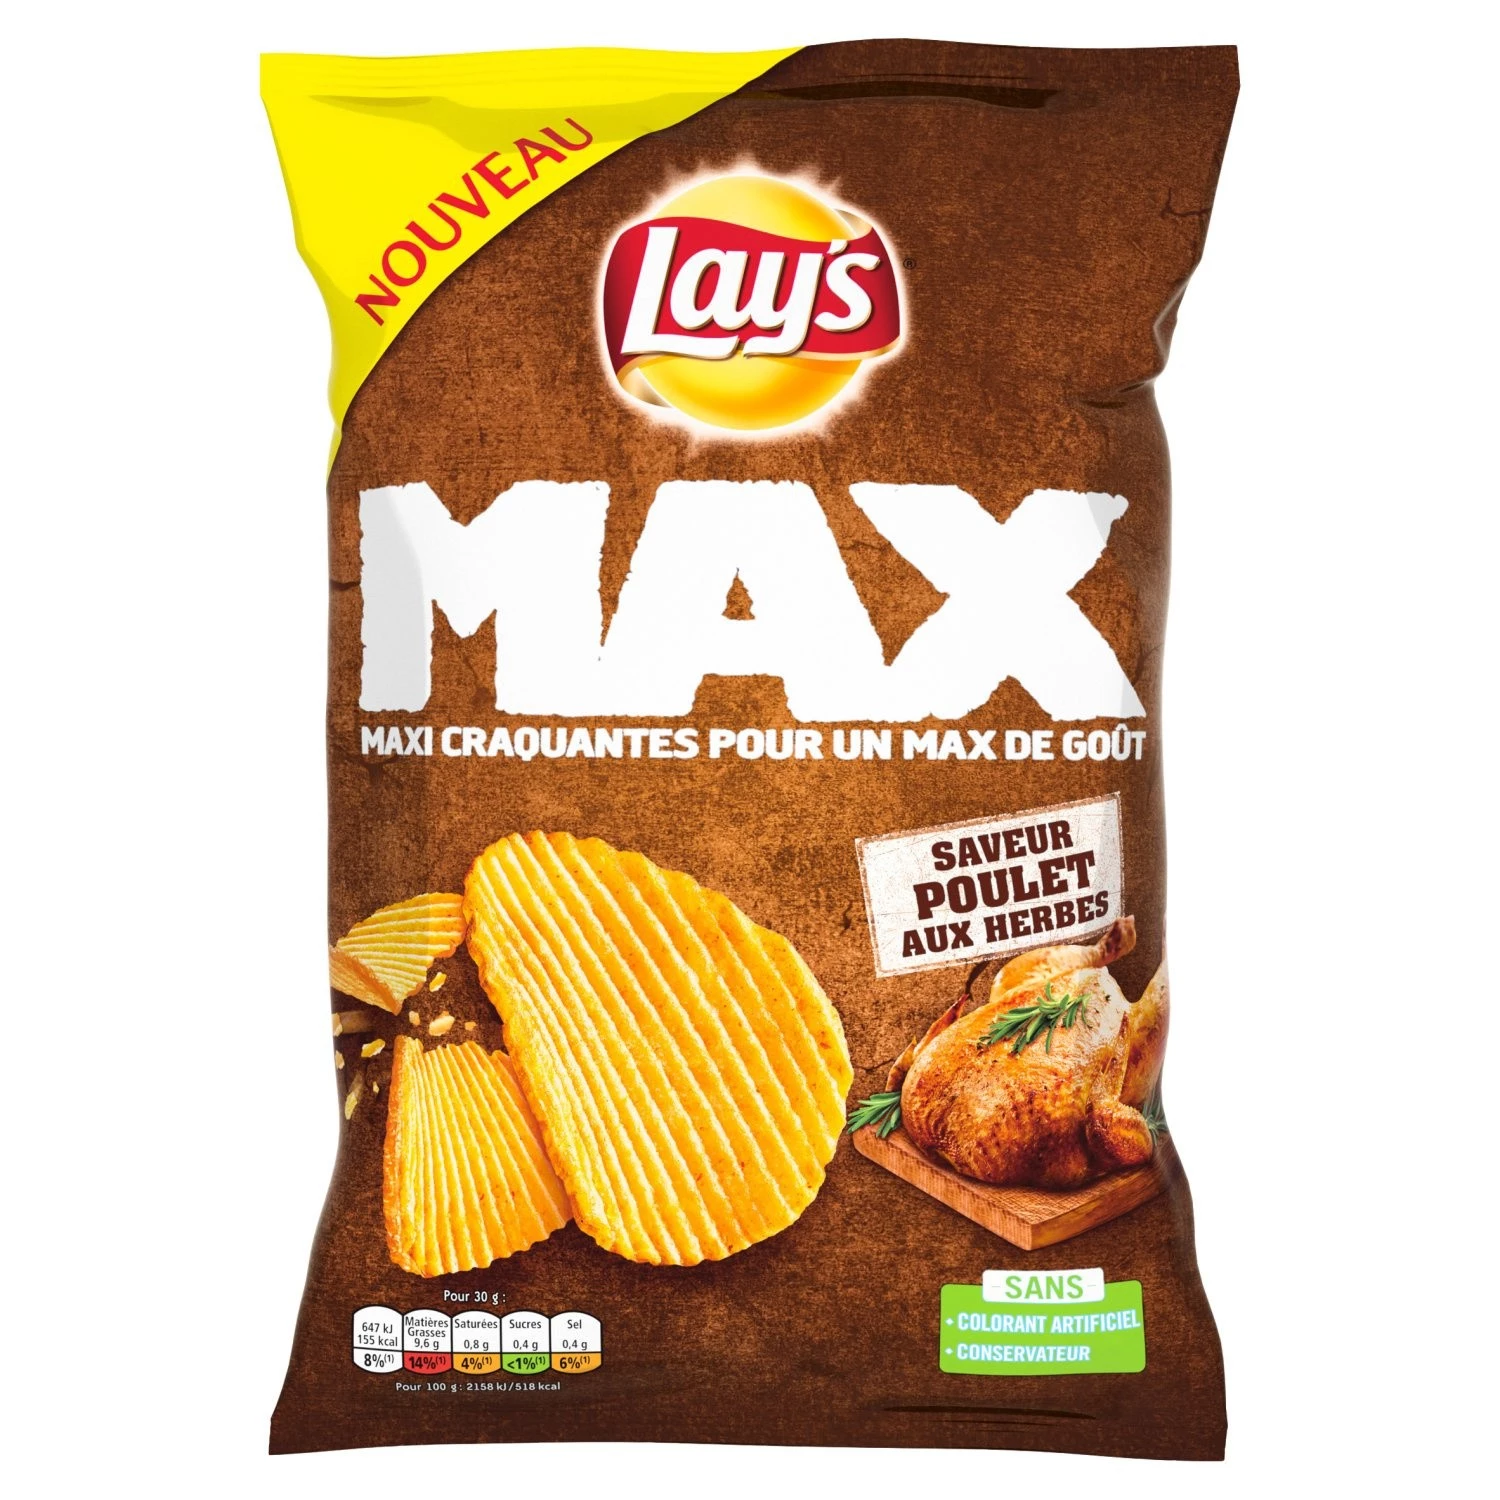 Max crisps chicken flavor with herbs 120g - LAY'S